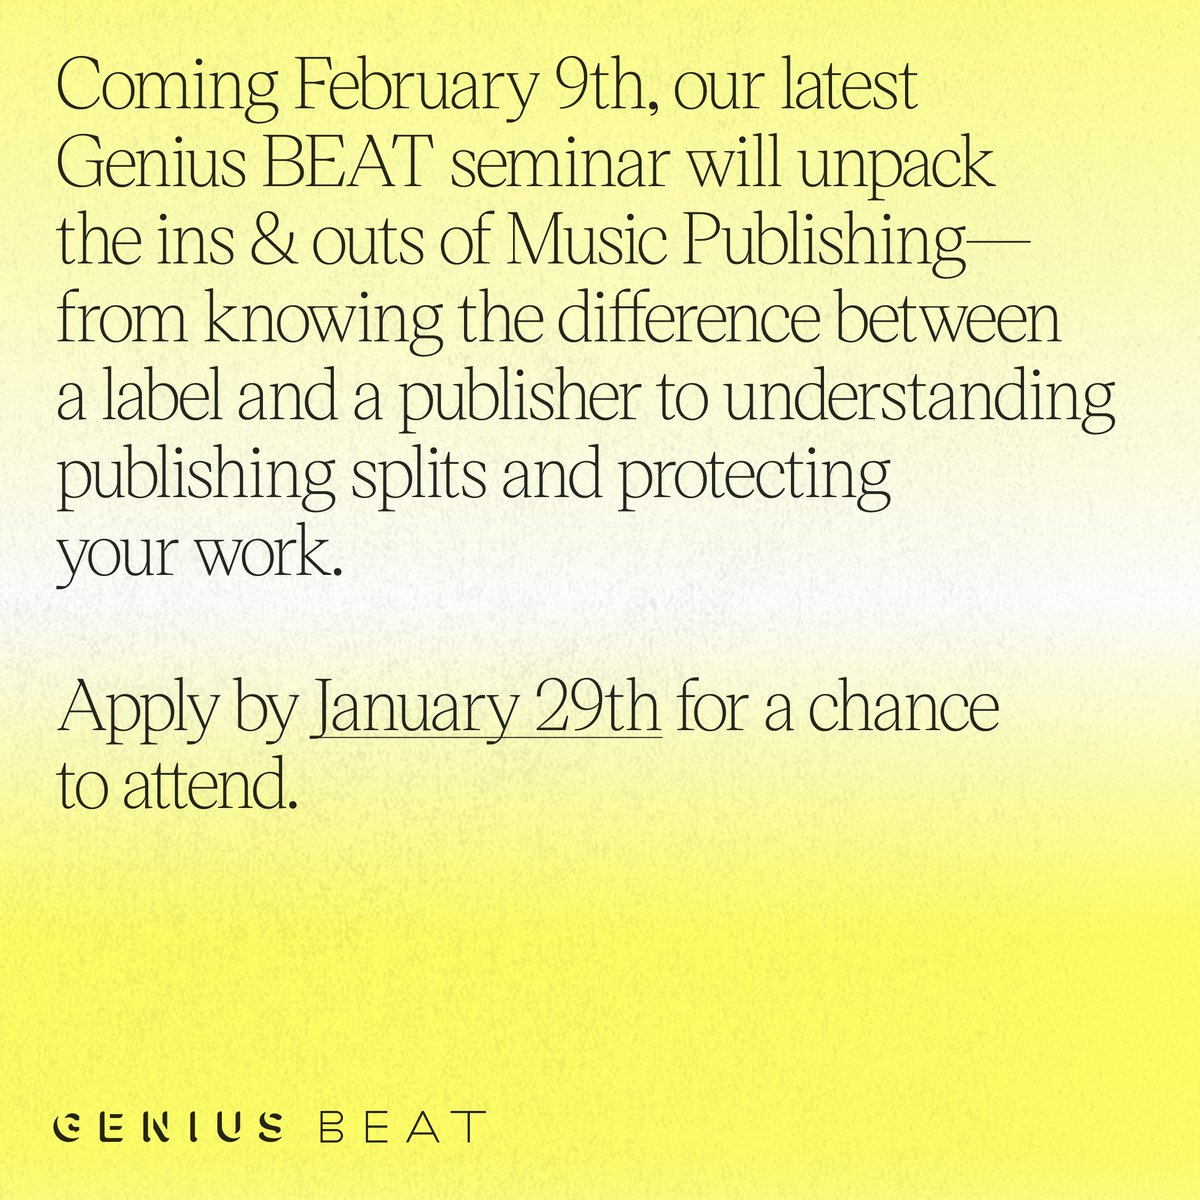 On February 9th, we’re hosting a *free* #GeniusBEAT seminar for independent Black artists and songwriters that will unpack the ins & outs of Music Publishing. 

Apply here for a chance to attend (deadline 1/29) ⬇️
so.genius.com/BaWPRIp